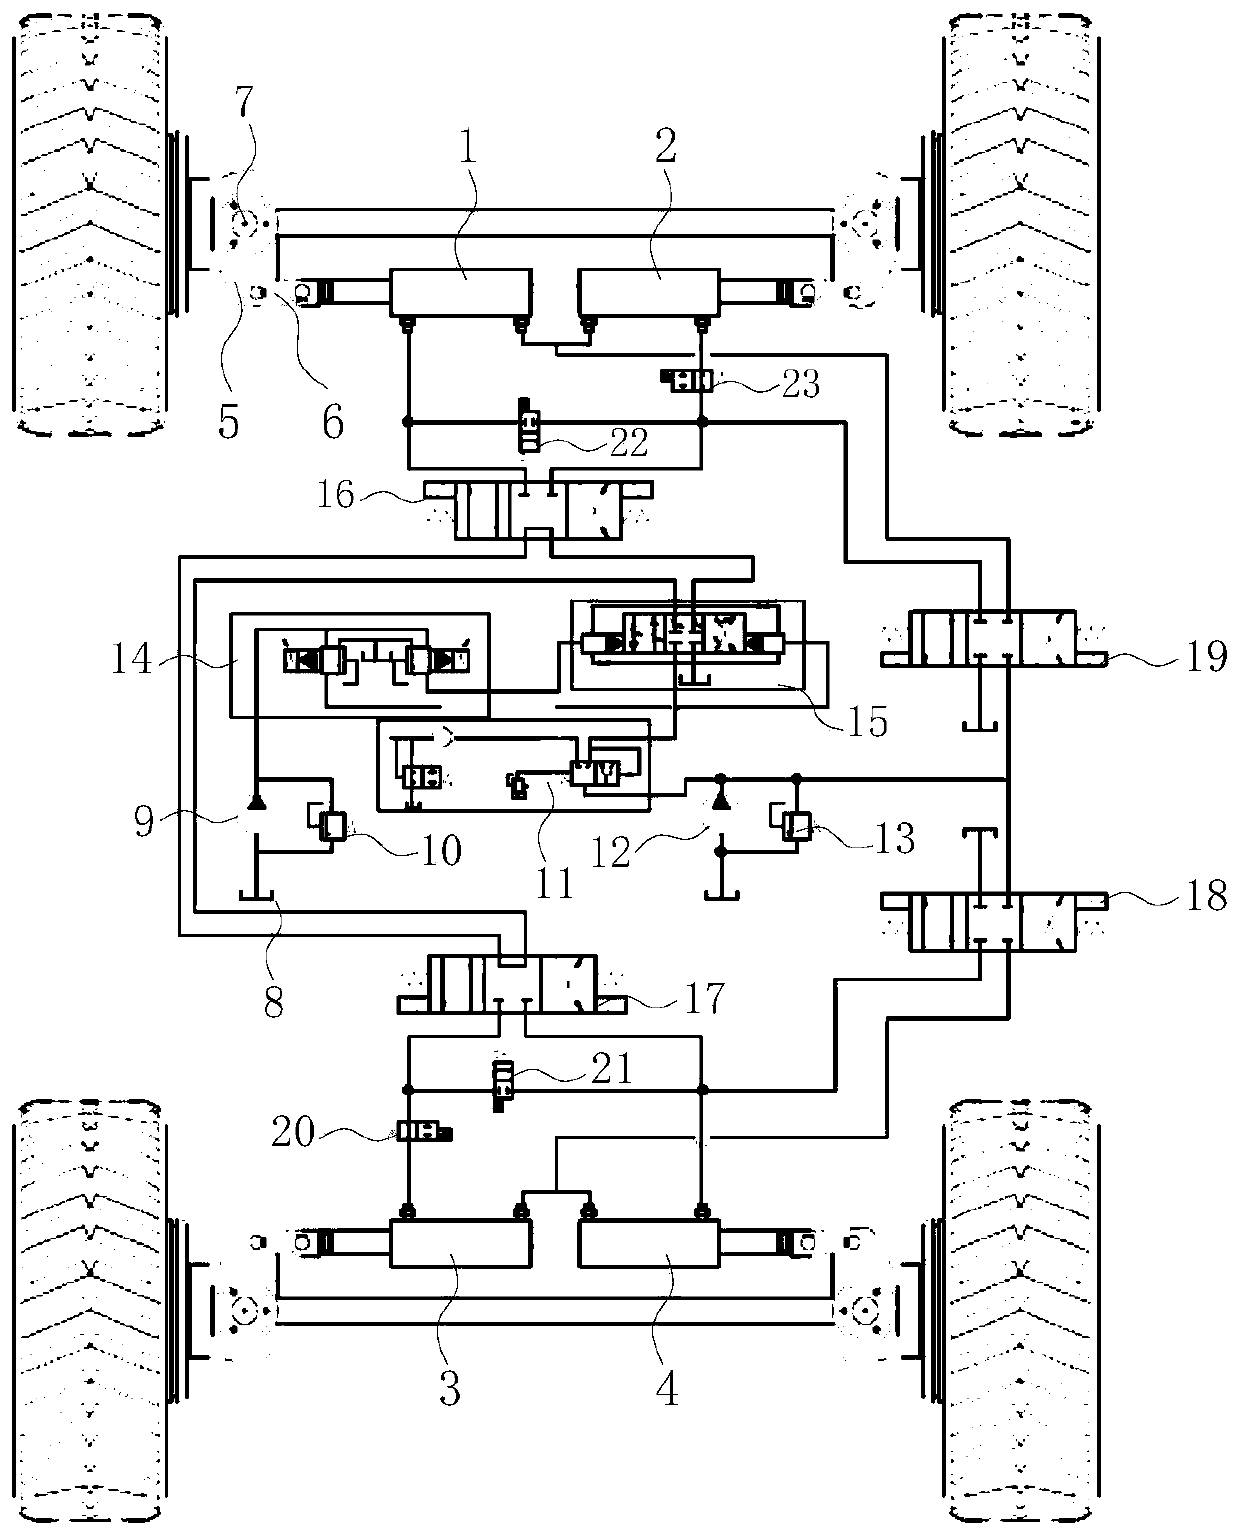 A multi-state steering system for a vehicle